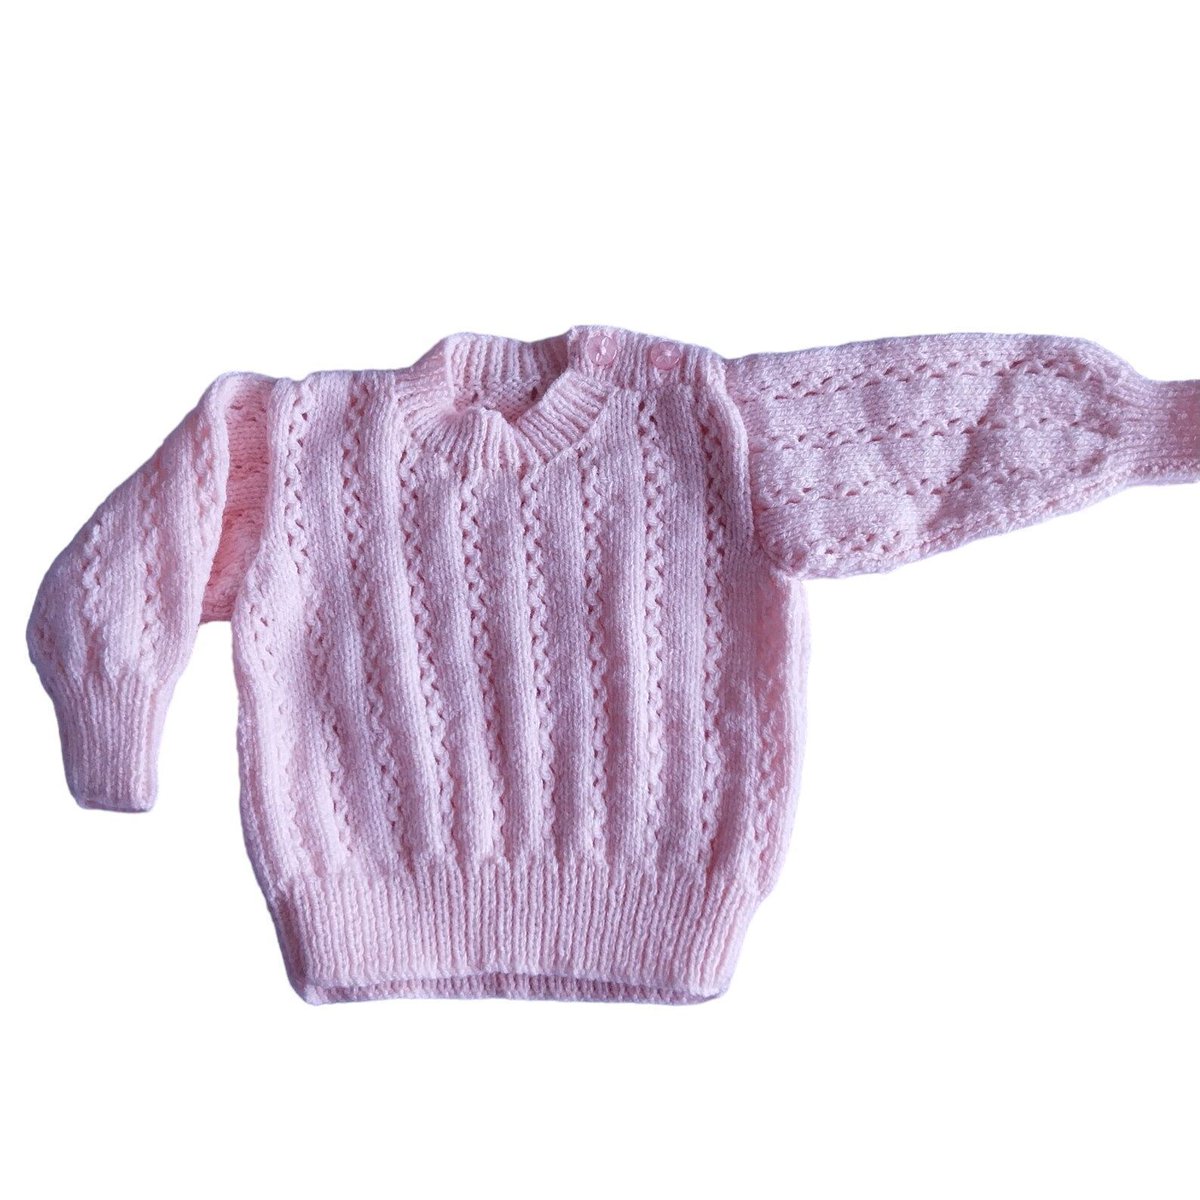 #MHHSBD 

𝗞𝗻𝗶𝘁𝘁𝗲𝗱 𝗯𝗮𝗯𝘆 𝗷𝘂𝗺𝗽𝗲𝗿 

Hand-knitted pale pink jumper for a 20-inch chest! Crafted with care, it features a round neck, wavy vertical eyelet rows, and buttons on the left shoulder. Fits 6-12 months, stylish and cozy. 

knittingtopia.etsy.com/listing/168093…